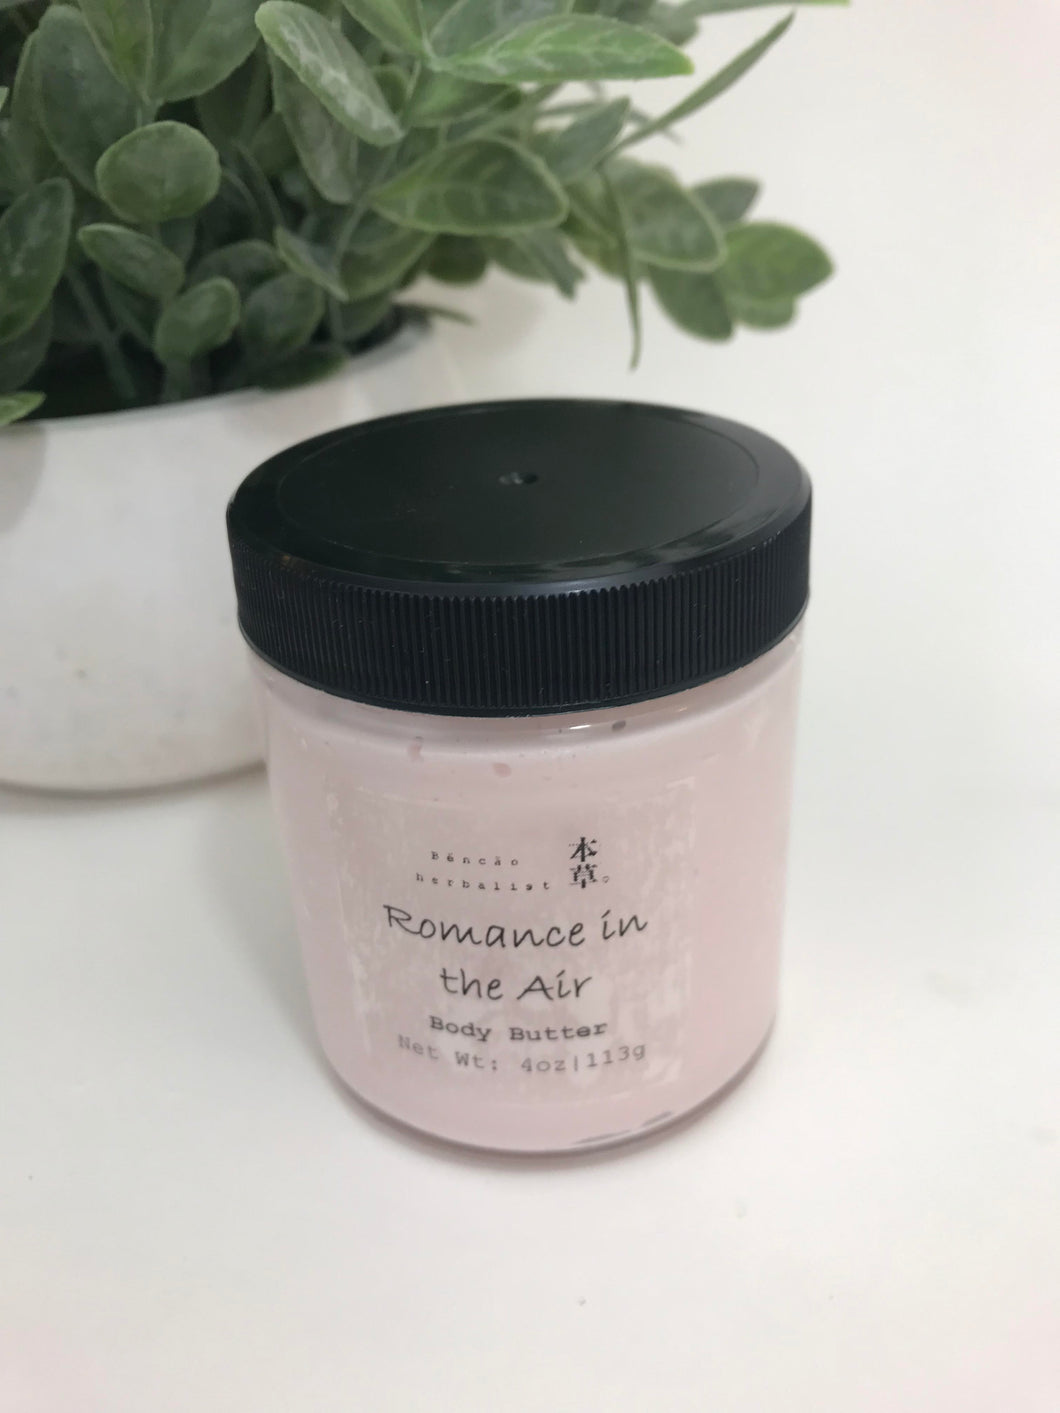 ROMANCE IN THE AIR BODY BUTTER